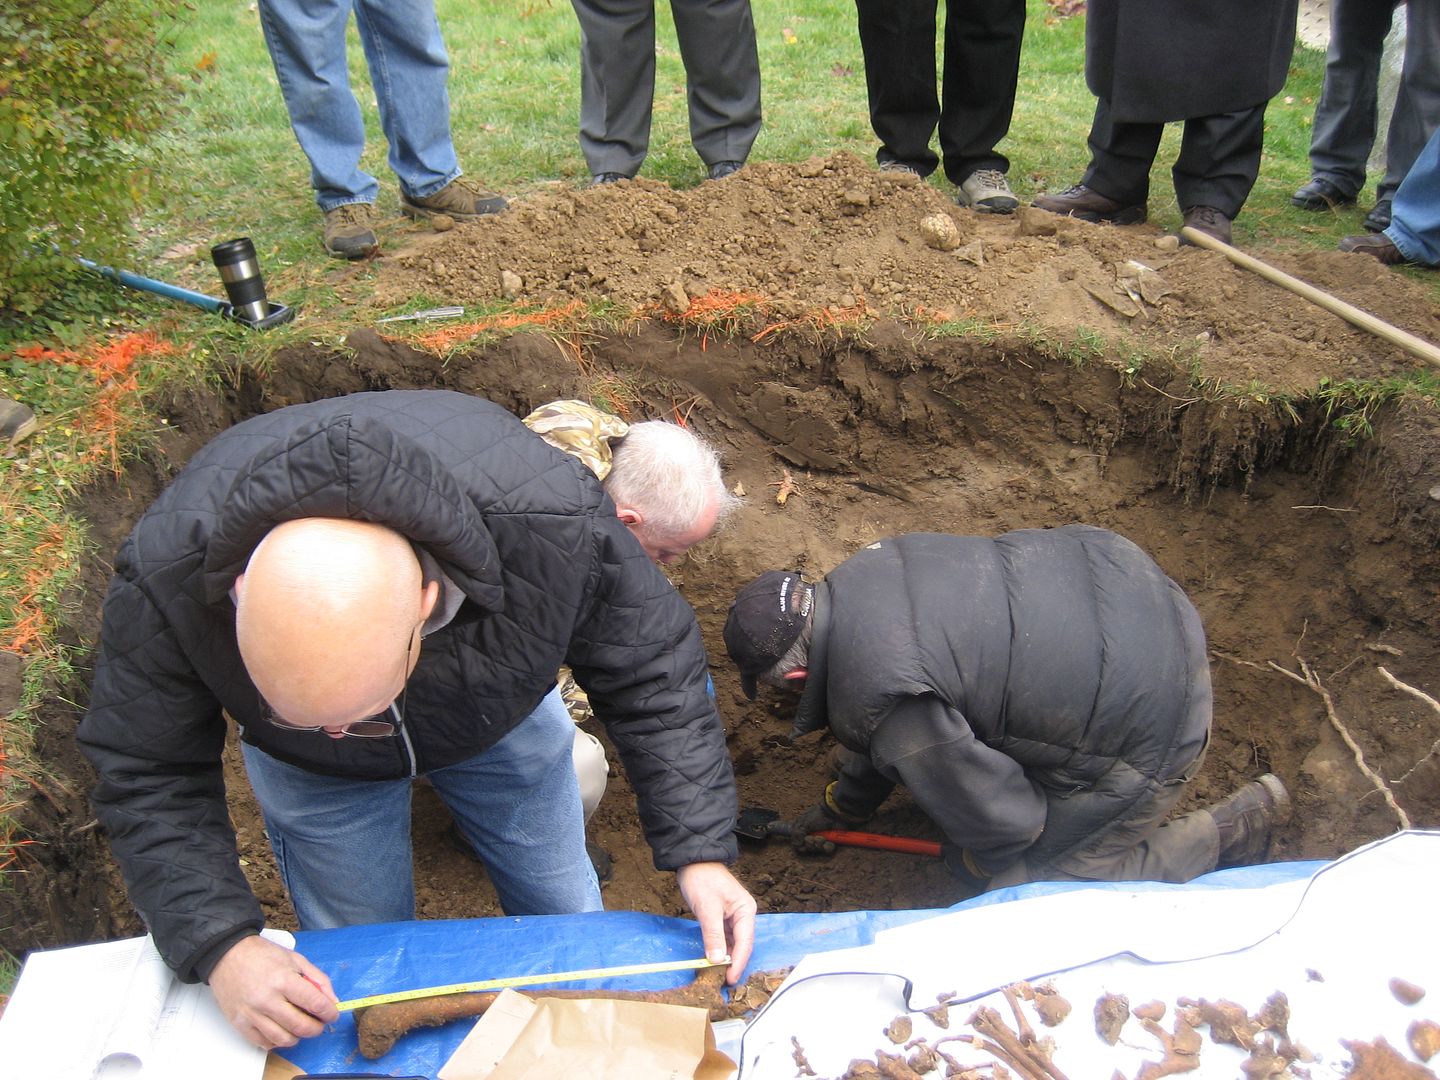 Turns out, we didnt need those ladders and buckets and ropes to excavate the grave. It was knee-deep in places. 